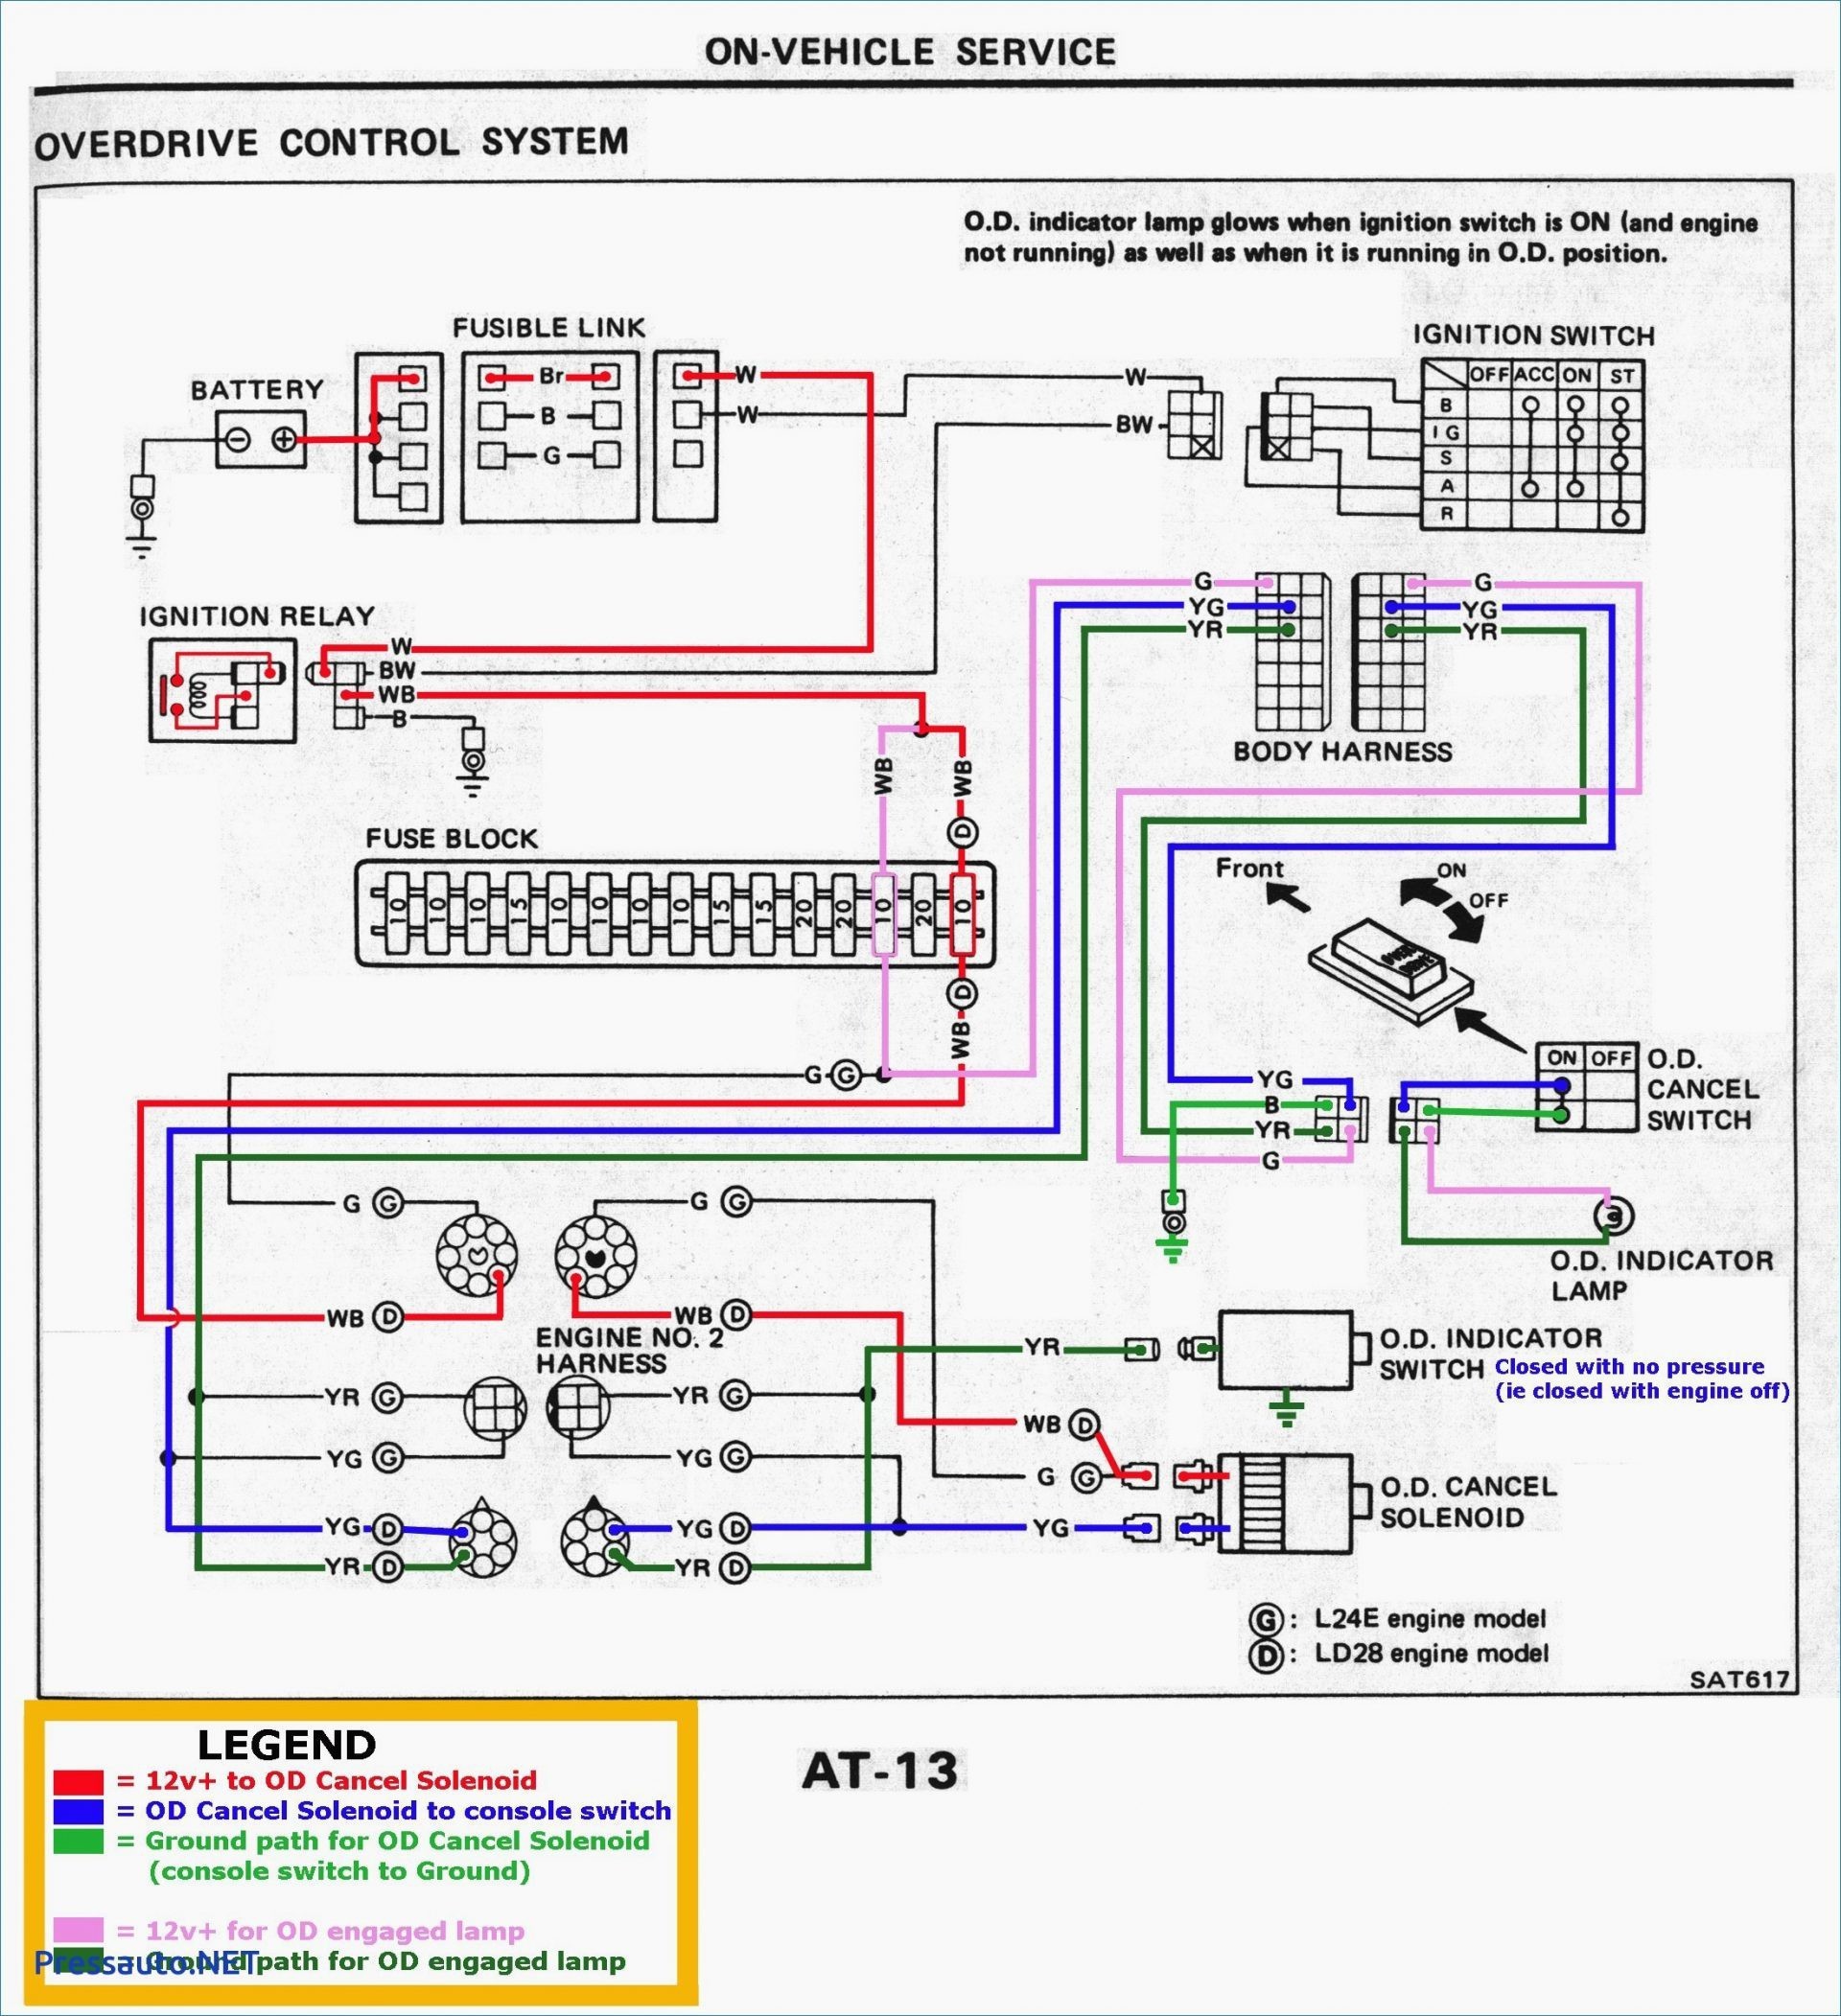 Vehicle Wiring Diagrams For Remote Starts Best Remote Car Starter Wiring Diagram Download